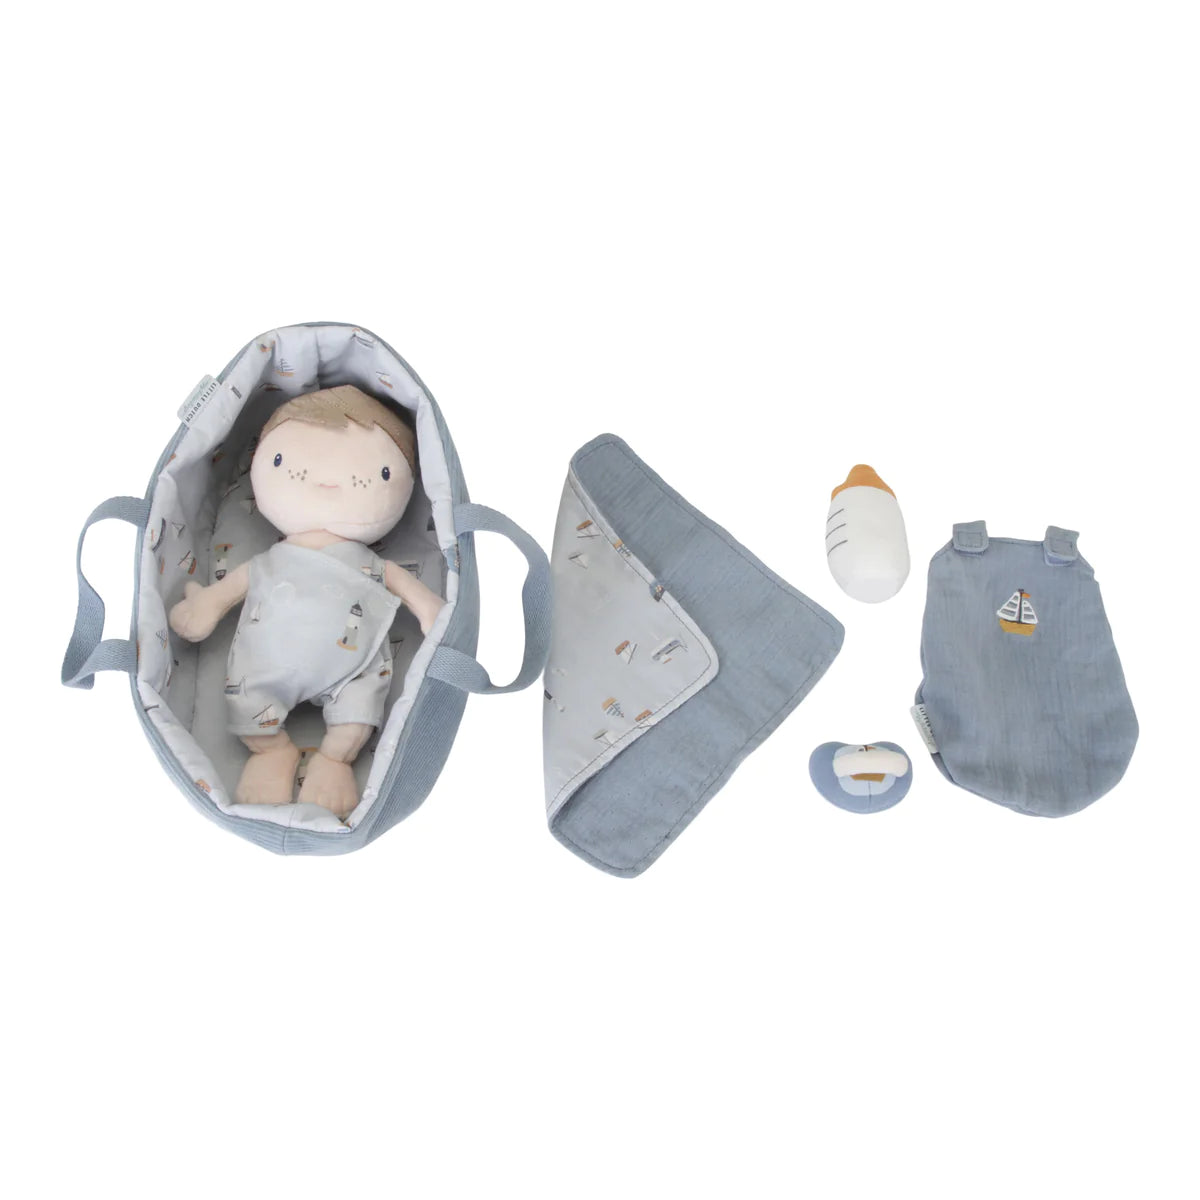 Little Dutch Baby Jim Doll with all his accessories including his outfit, moses basket, blanket, bottle, dummy and sleeping bag